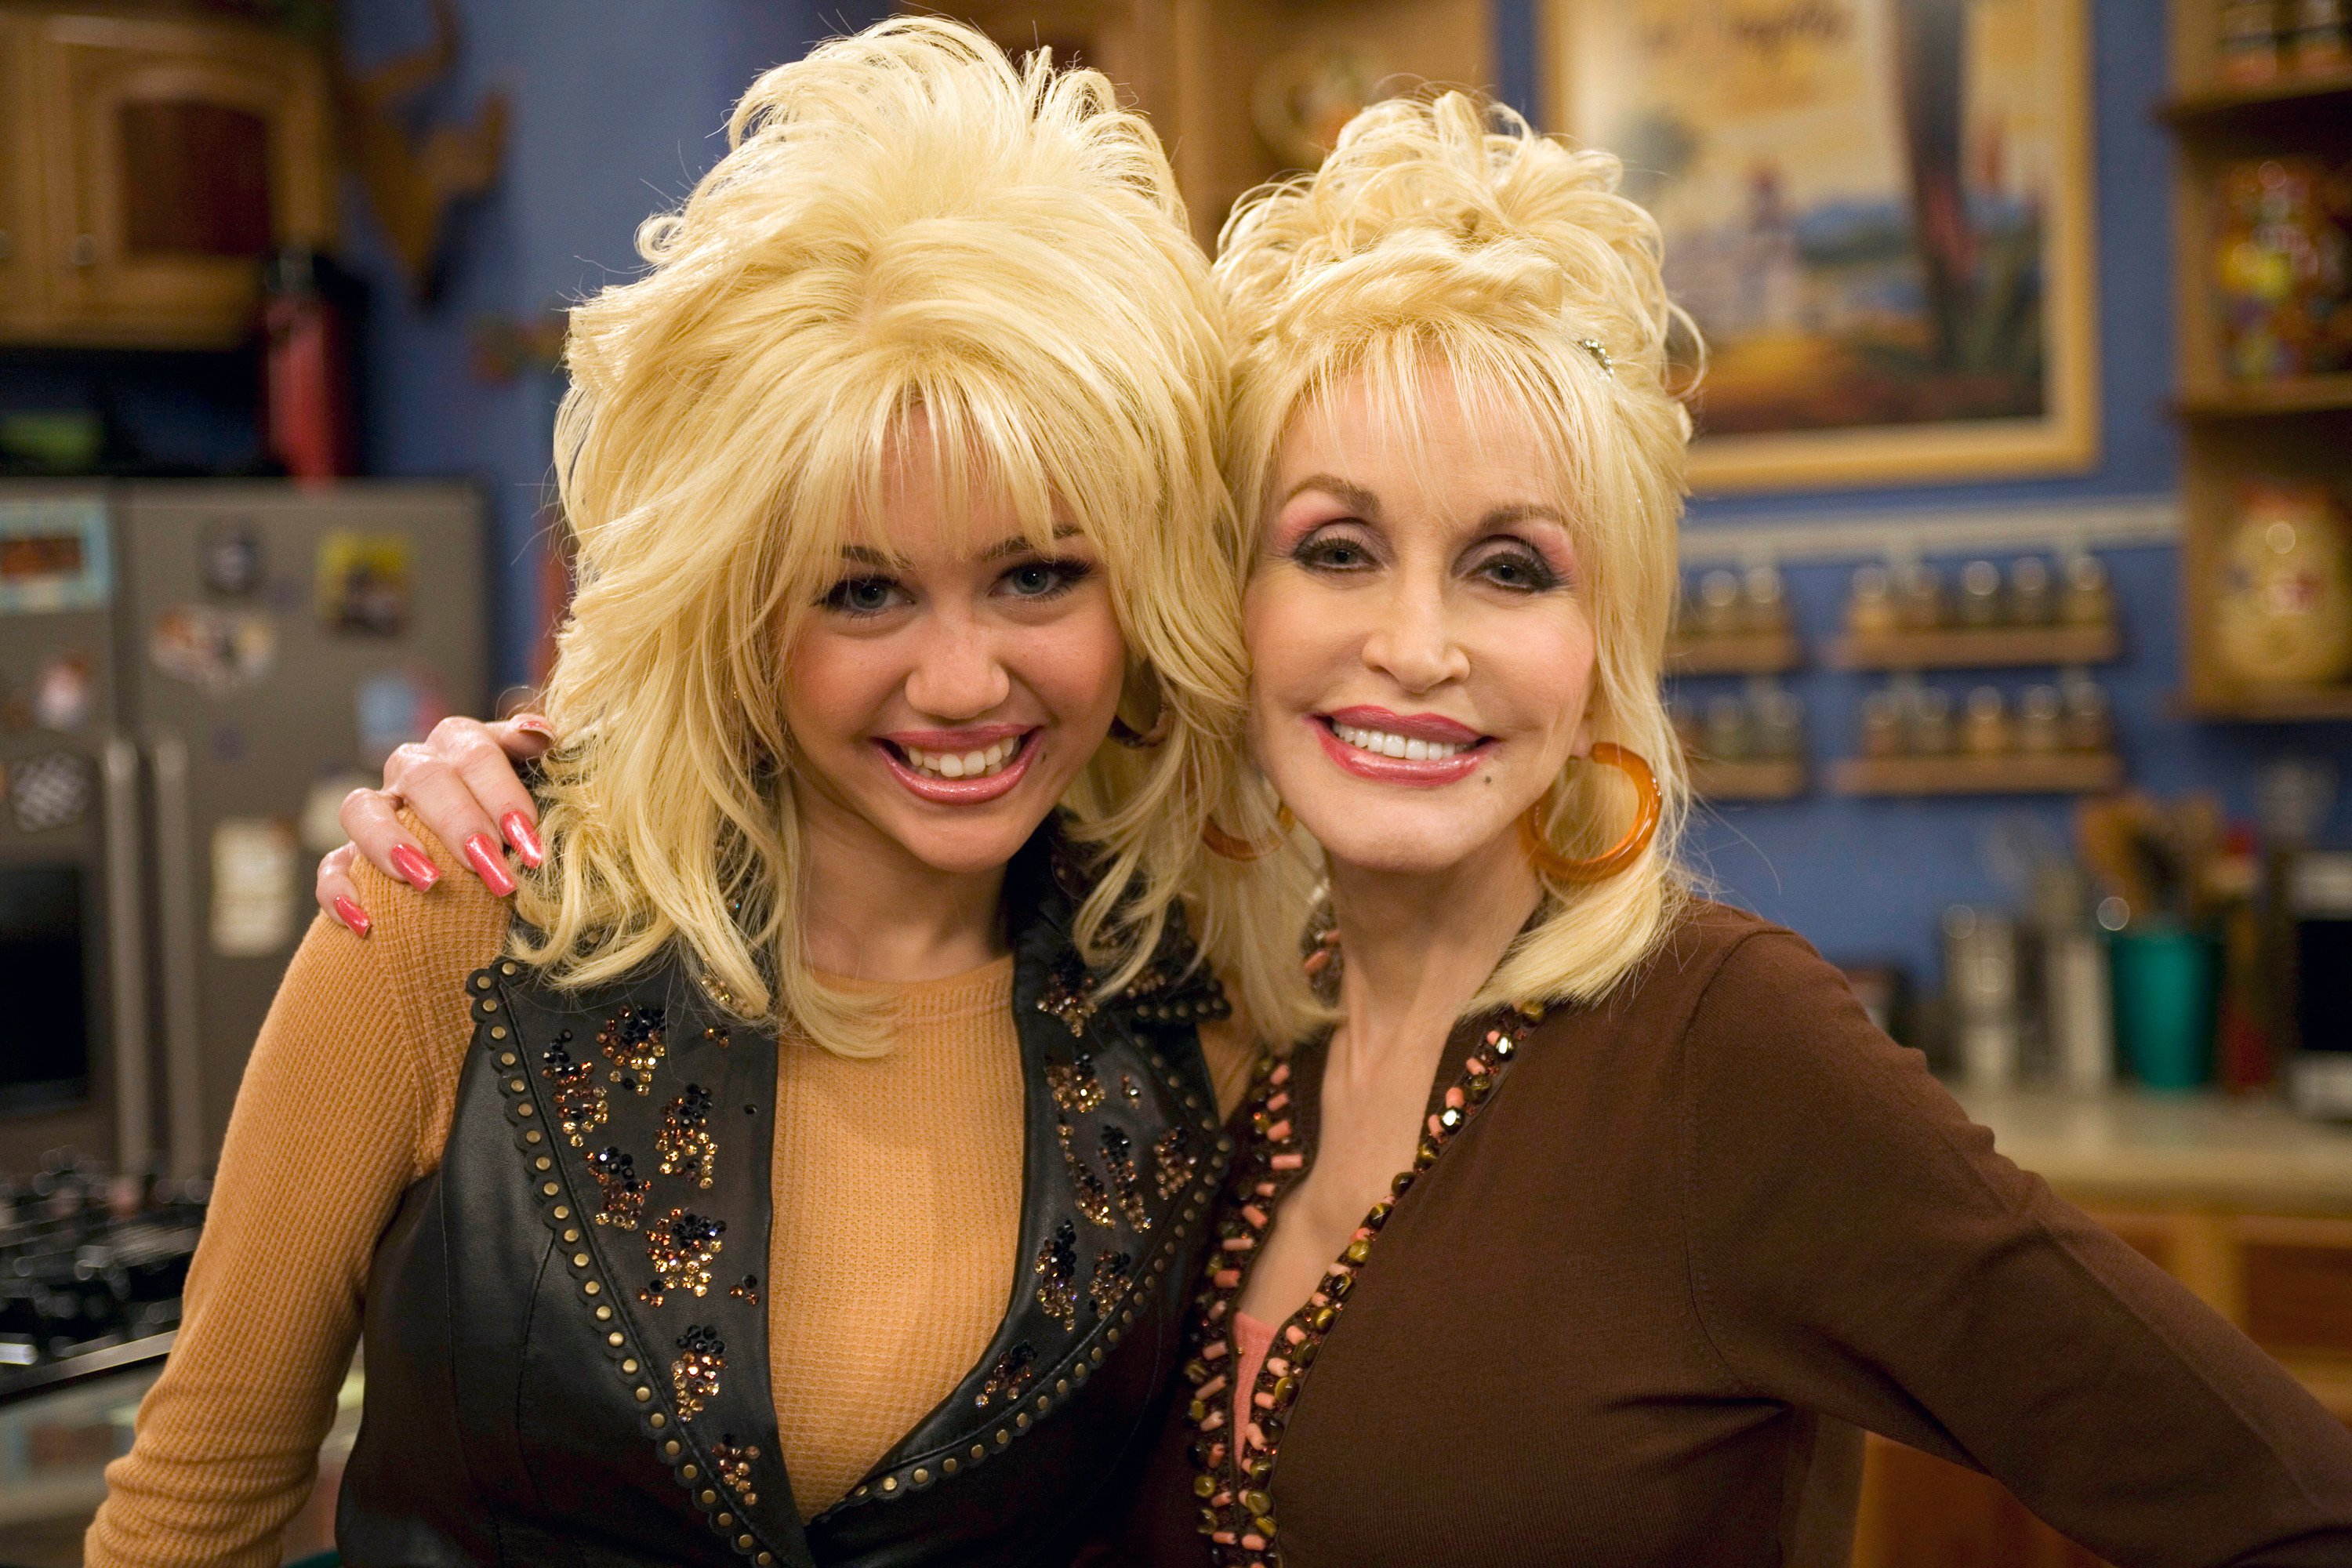 'Hannah Montana' episode titled 'I Will Always Loathe You' featuring Miley Cyrus and Dolly Parton